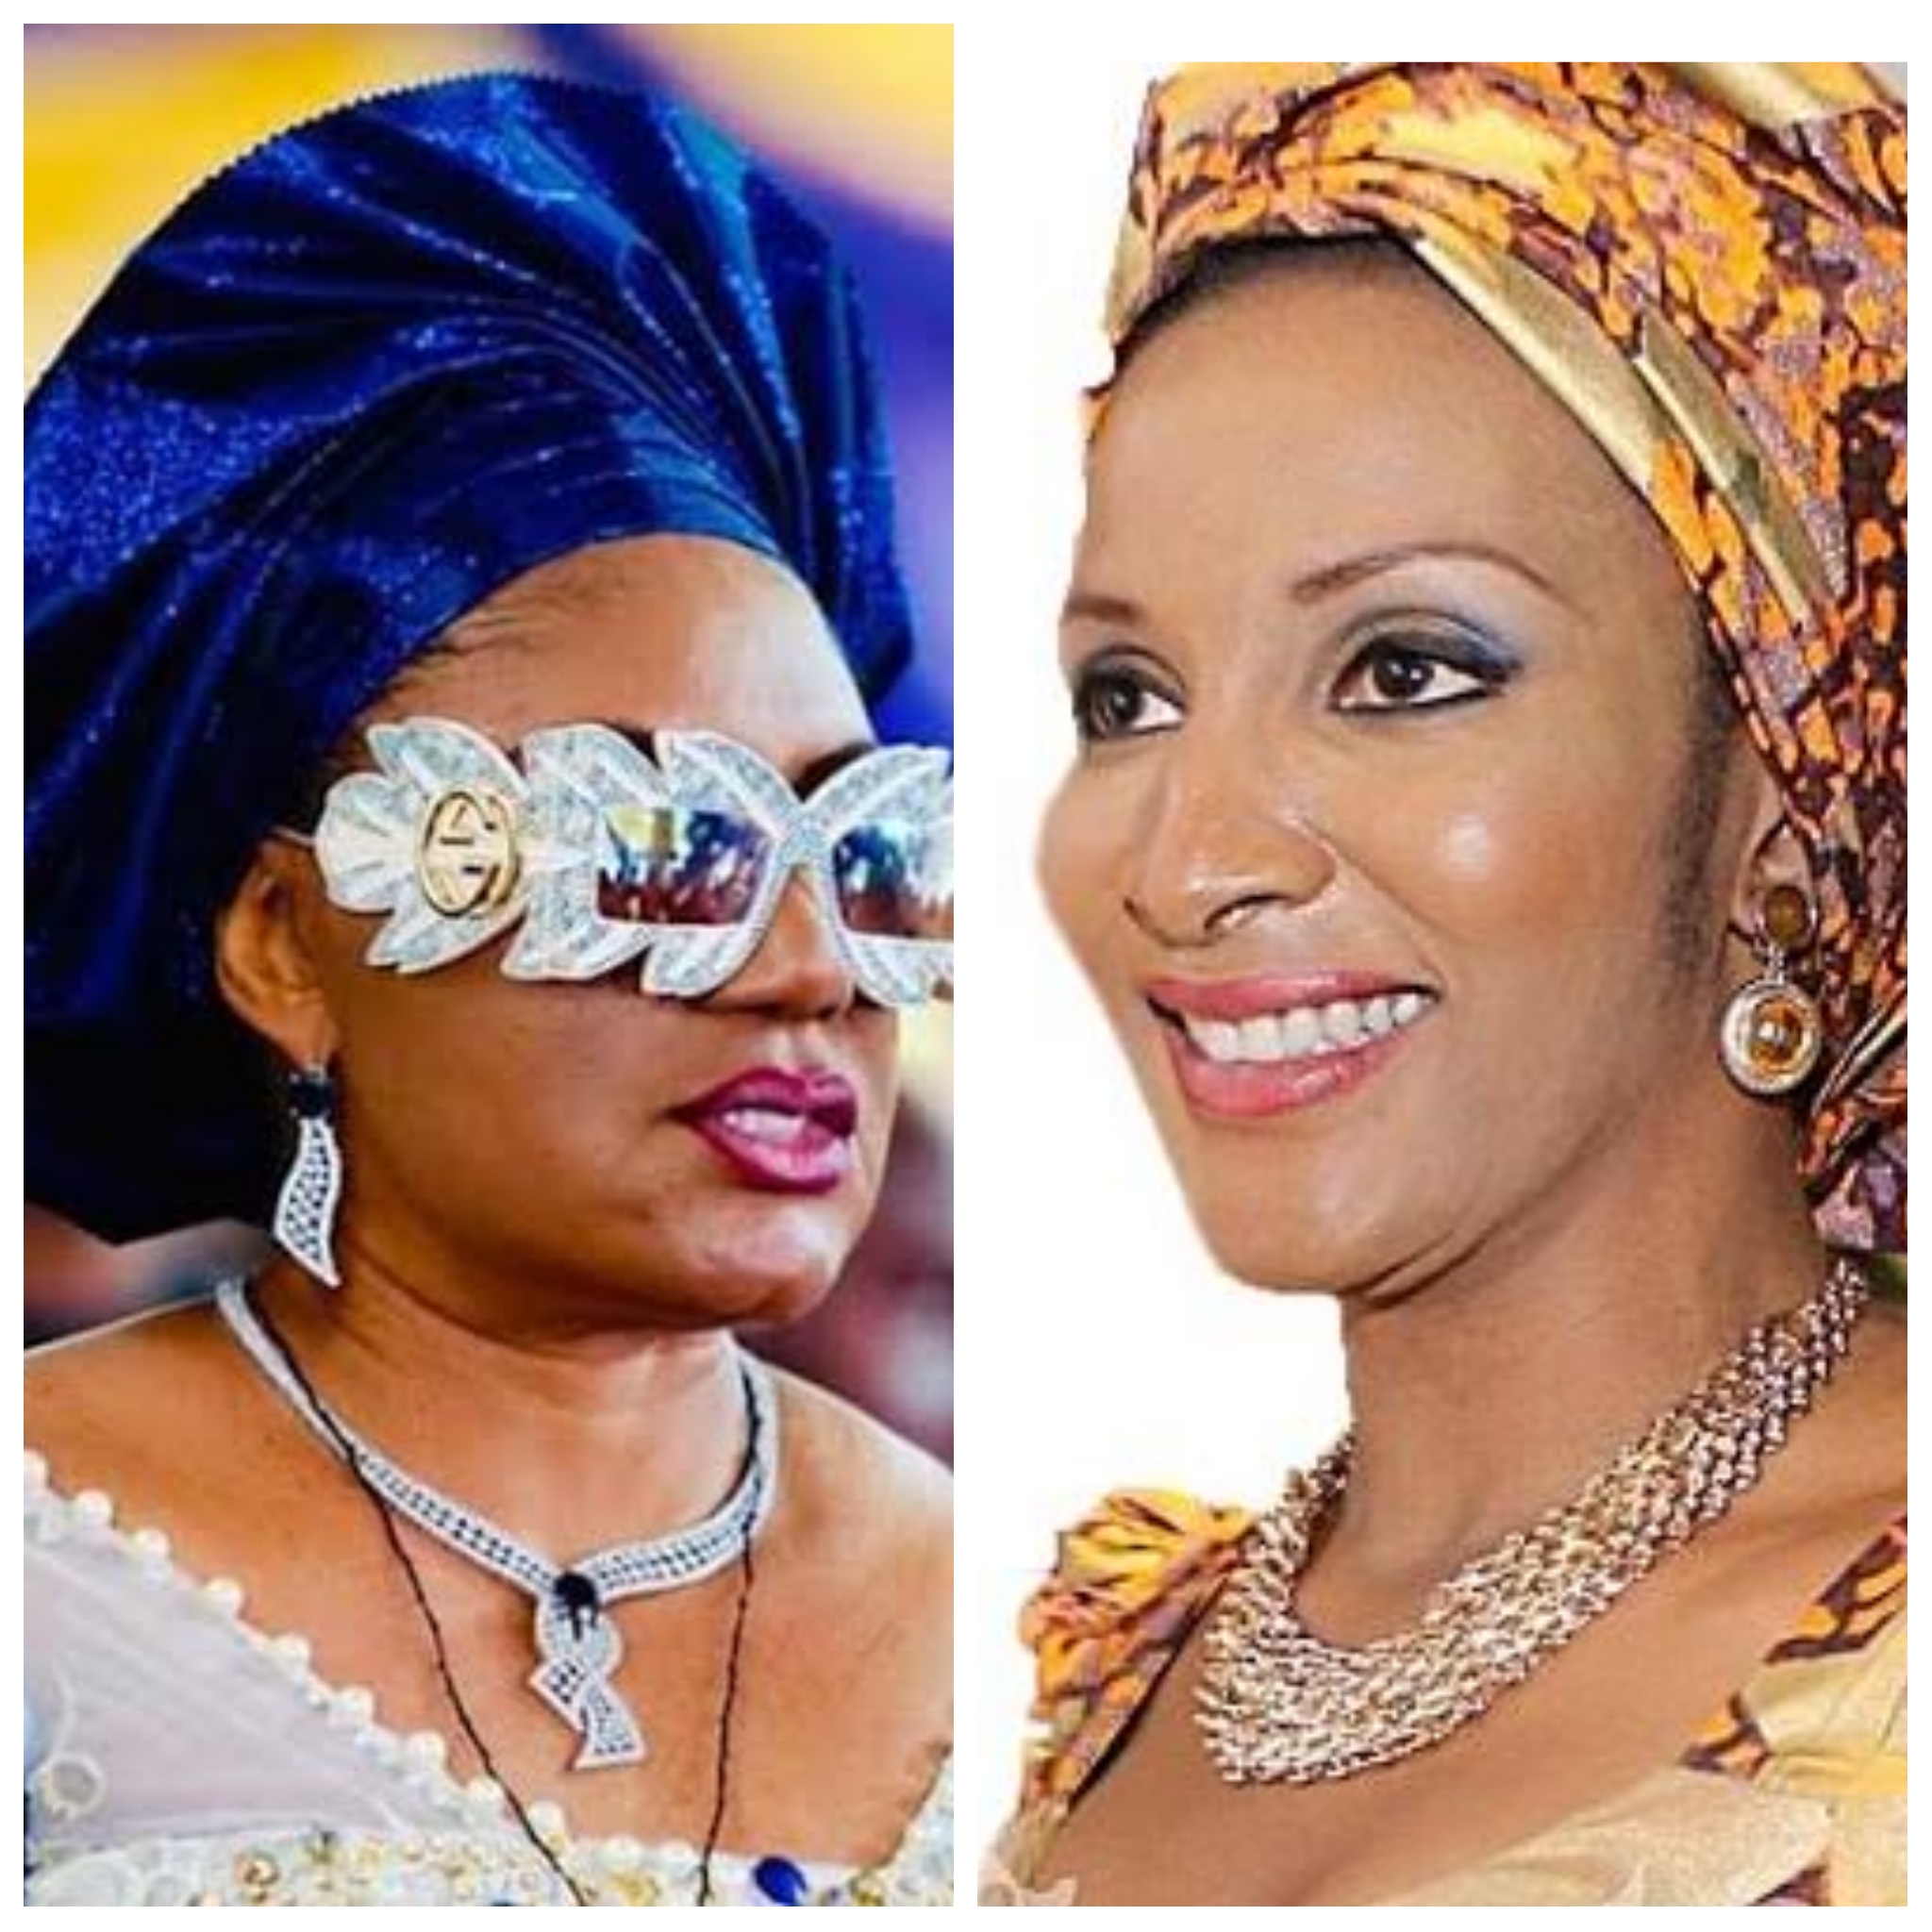 Commotion as Anambra first lady and Bianca Ojukwu engage in physical assault at Soludo’s inauguration 